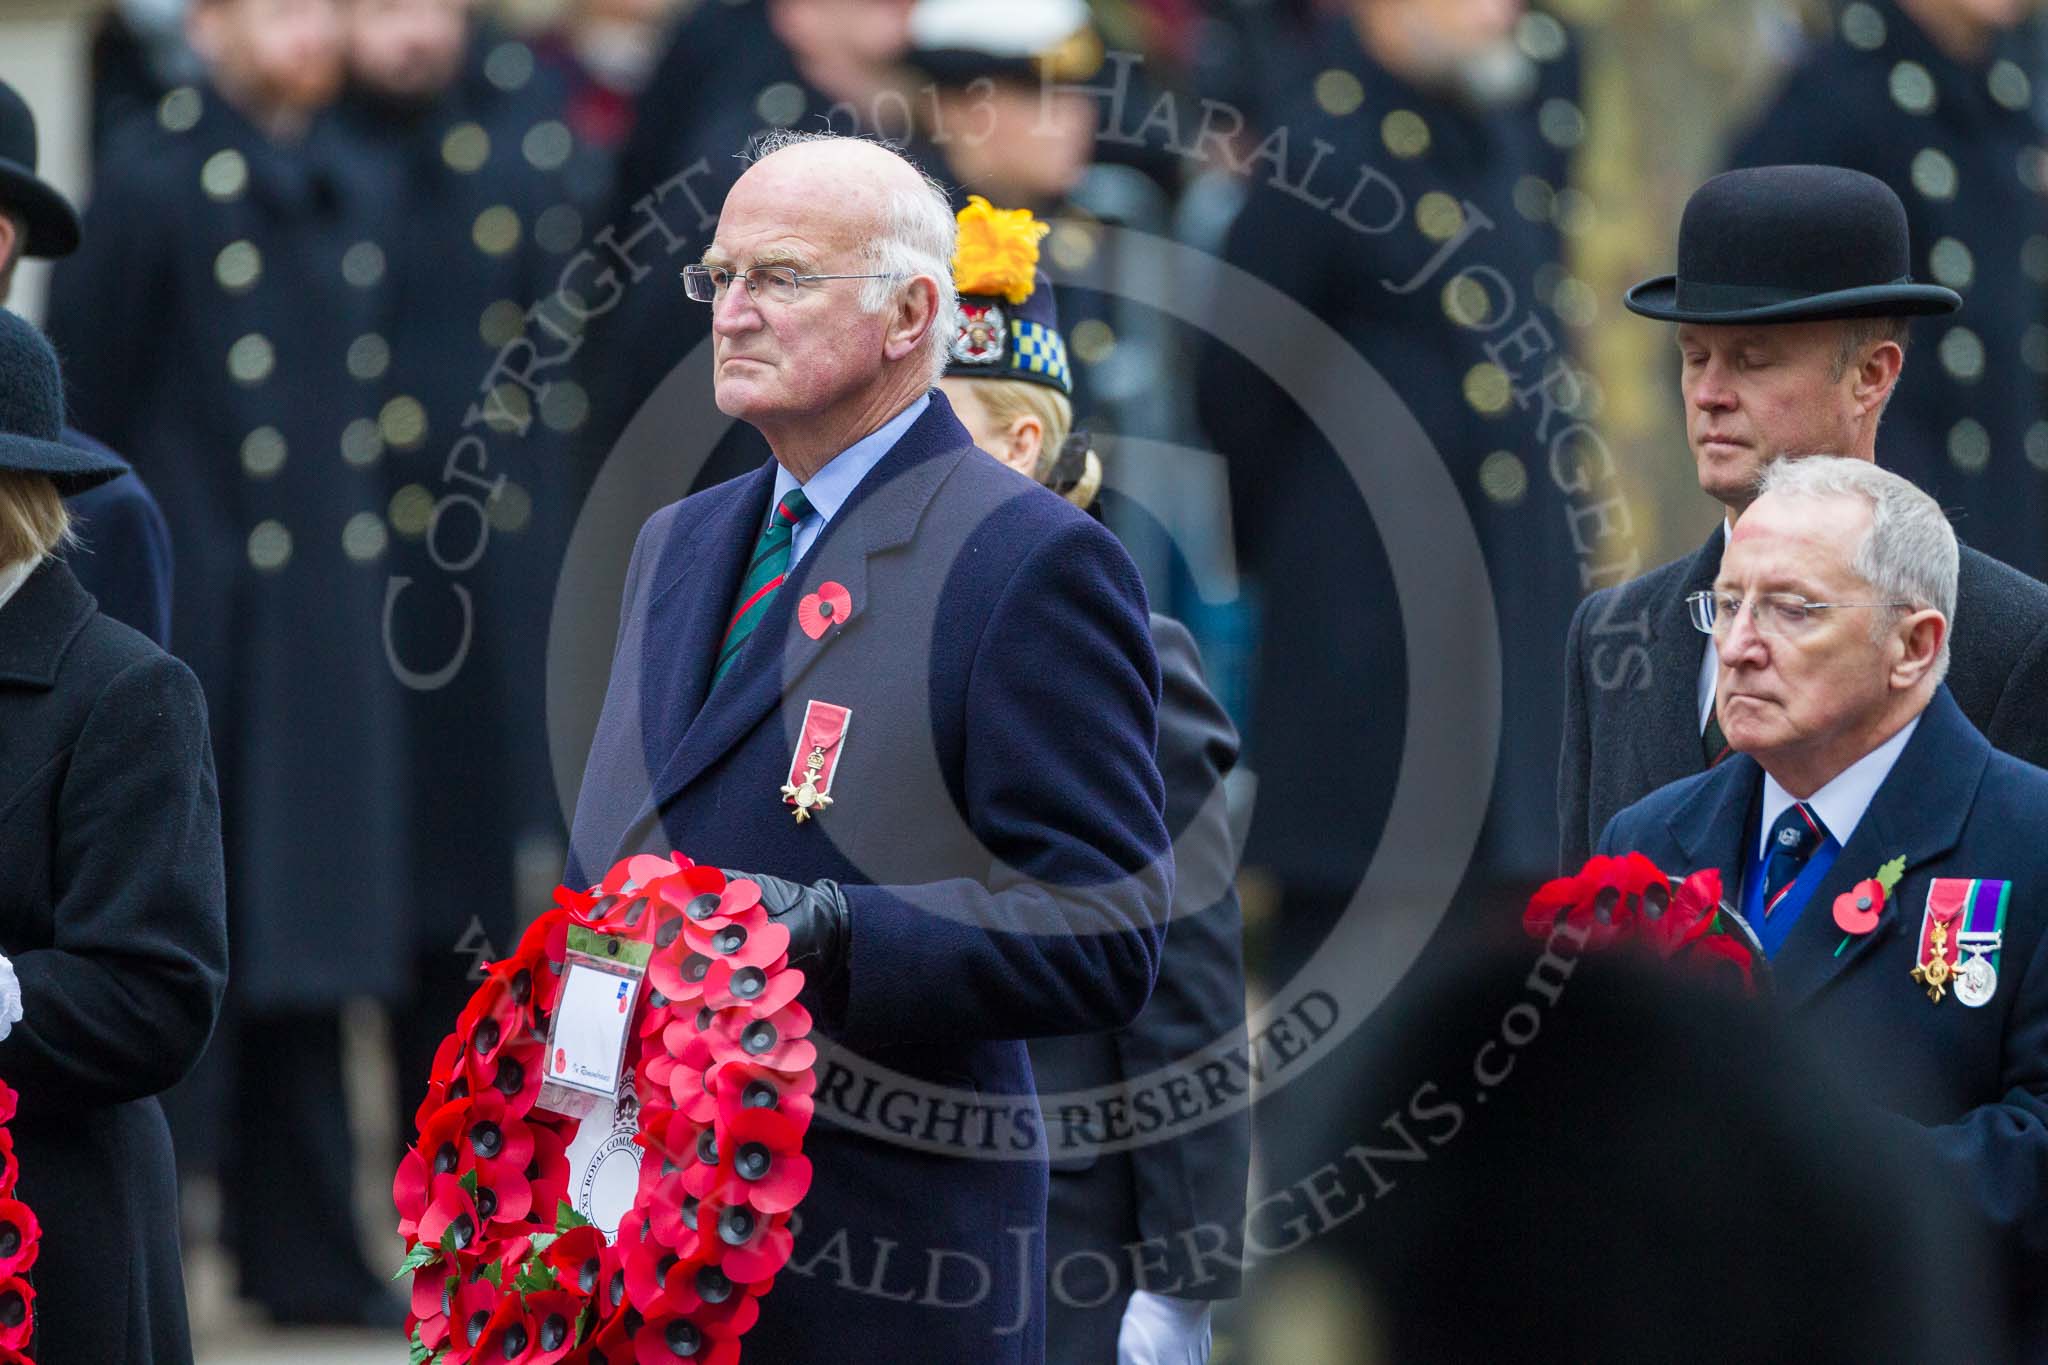 Remembrance Sunday at the Cenotaph 2015: Mr Patrick Mitford-Slade with a wreath on behalf of the Royal Commonwealth Ex-Services League. Behind him Christopher Dovey, the national chairman of the Royal Naval Association. Image #334, 08 November 2015 11:24 Whitehall, London, UK